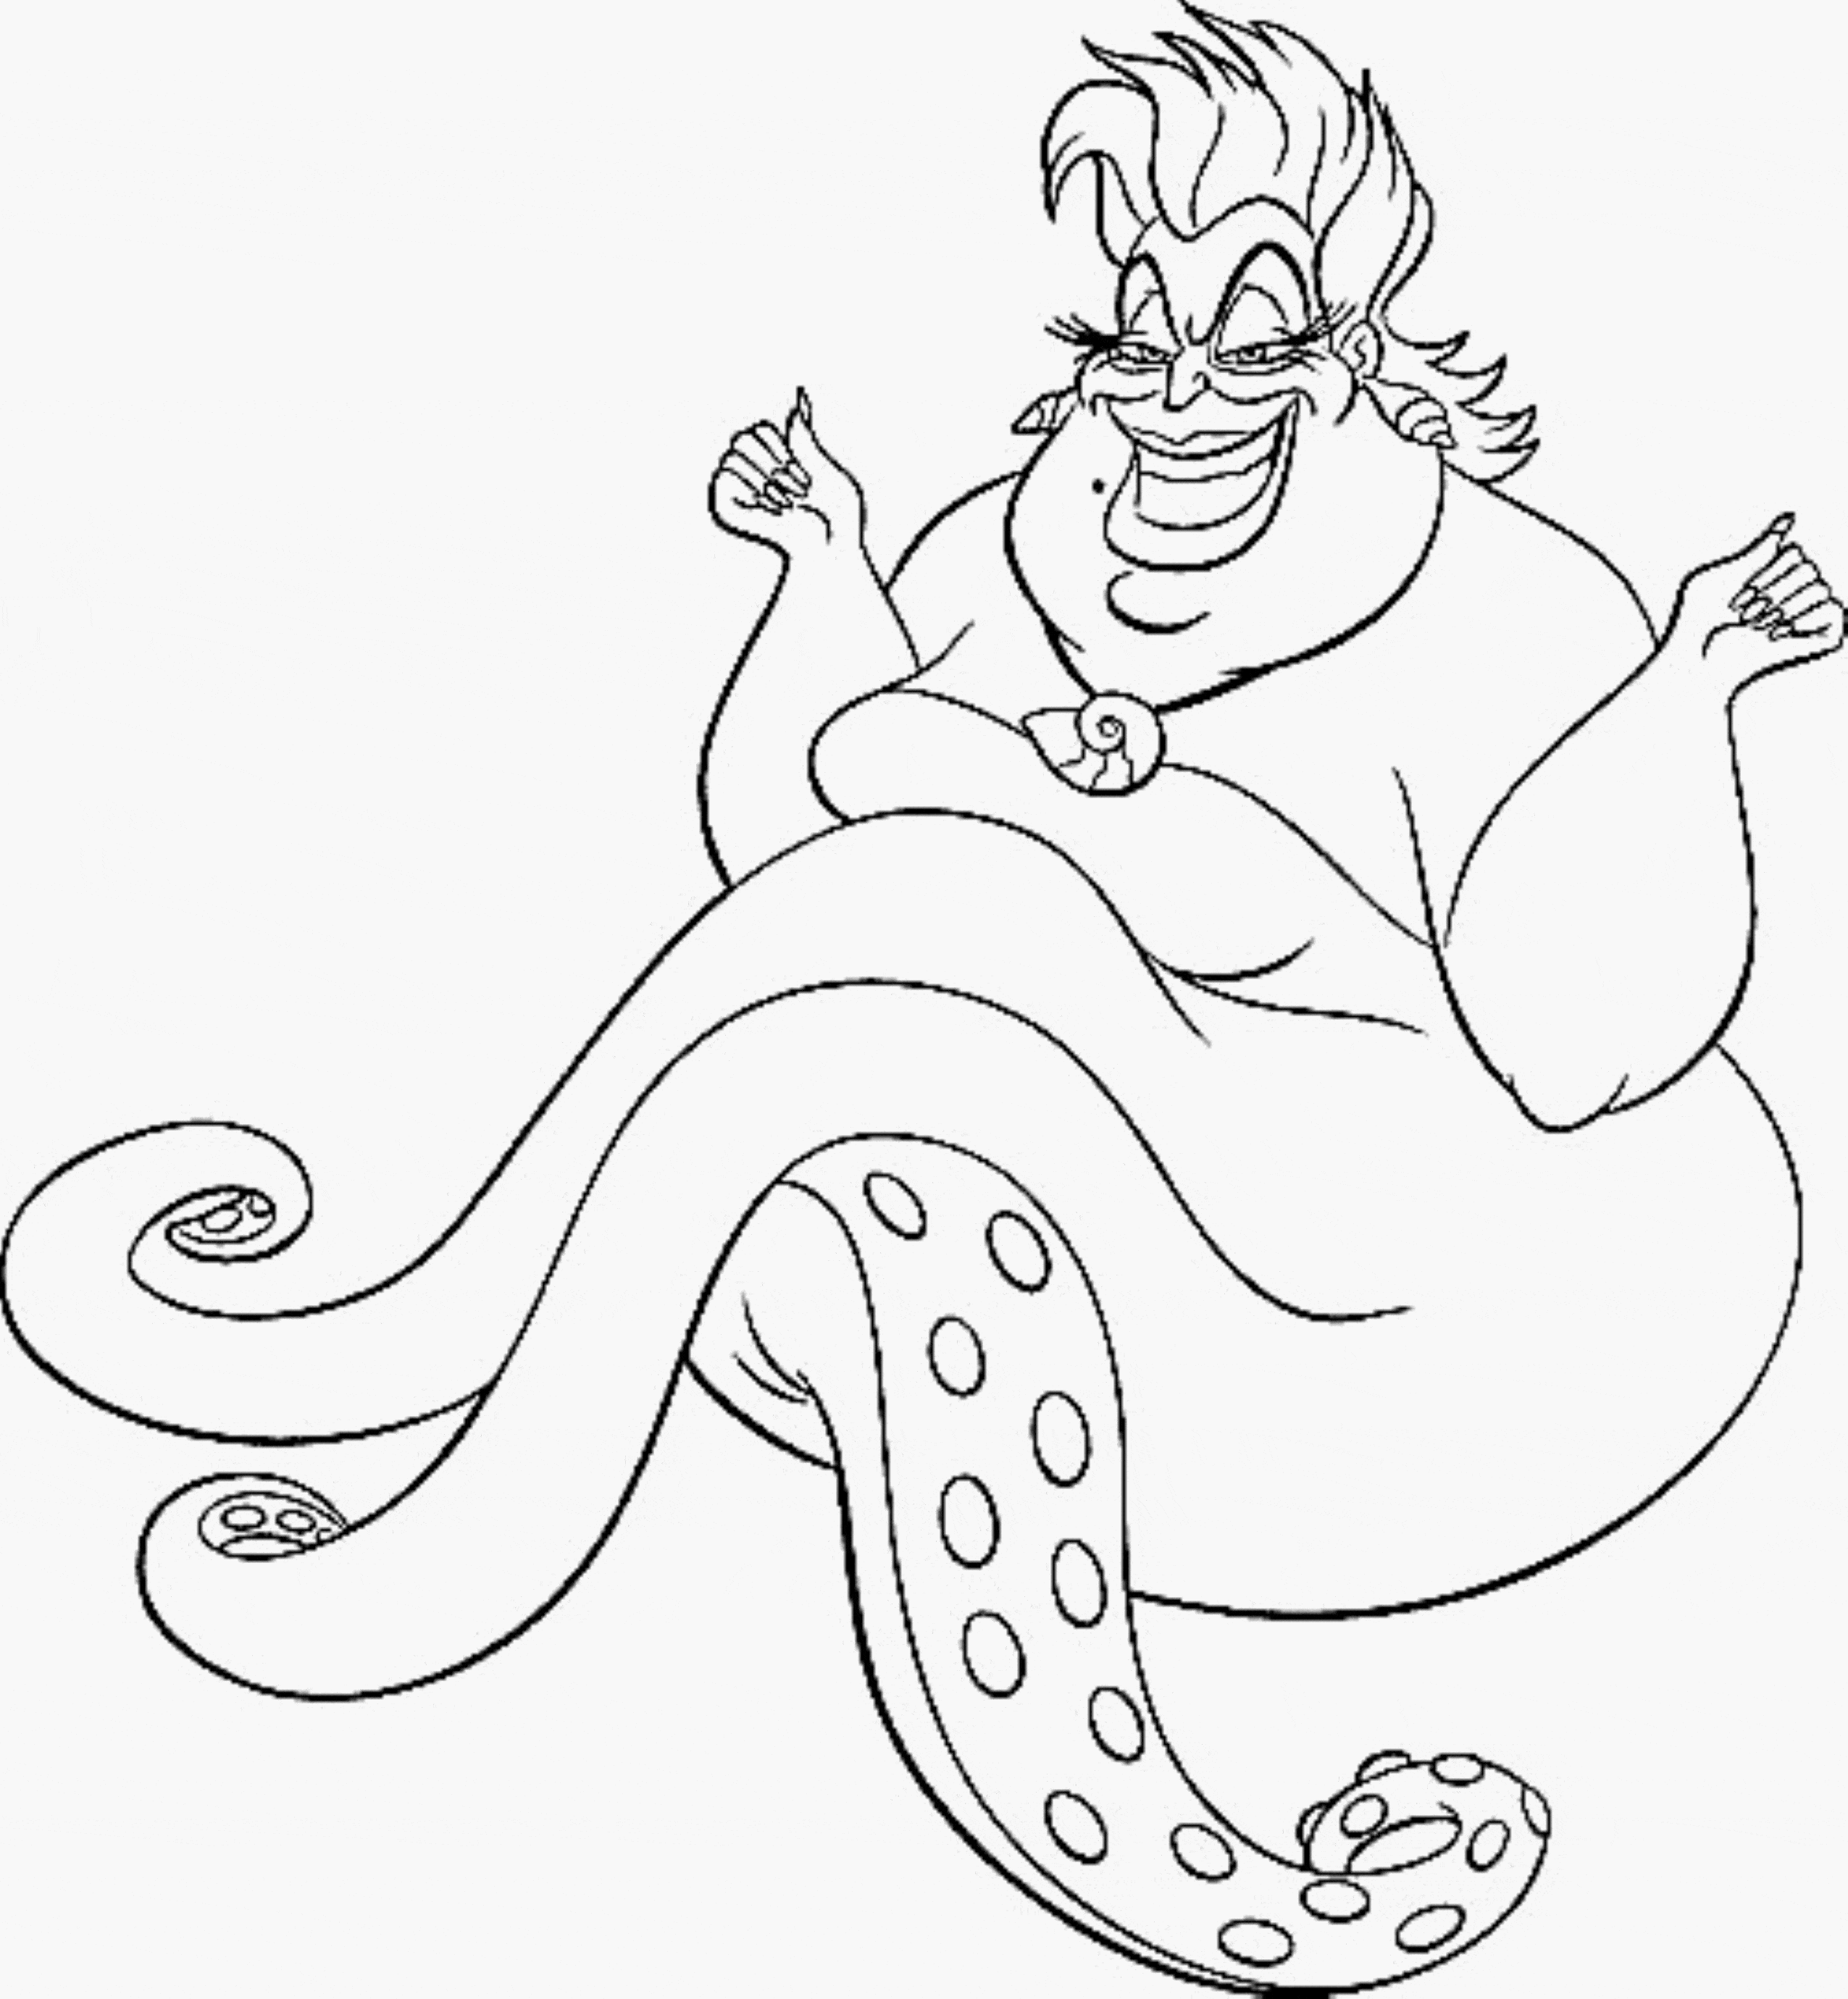 Print & Download - Find the Suitable Little Mermaid Coloring Pages for ...